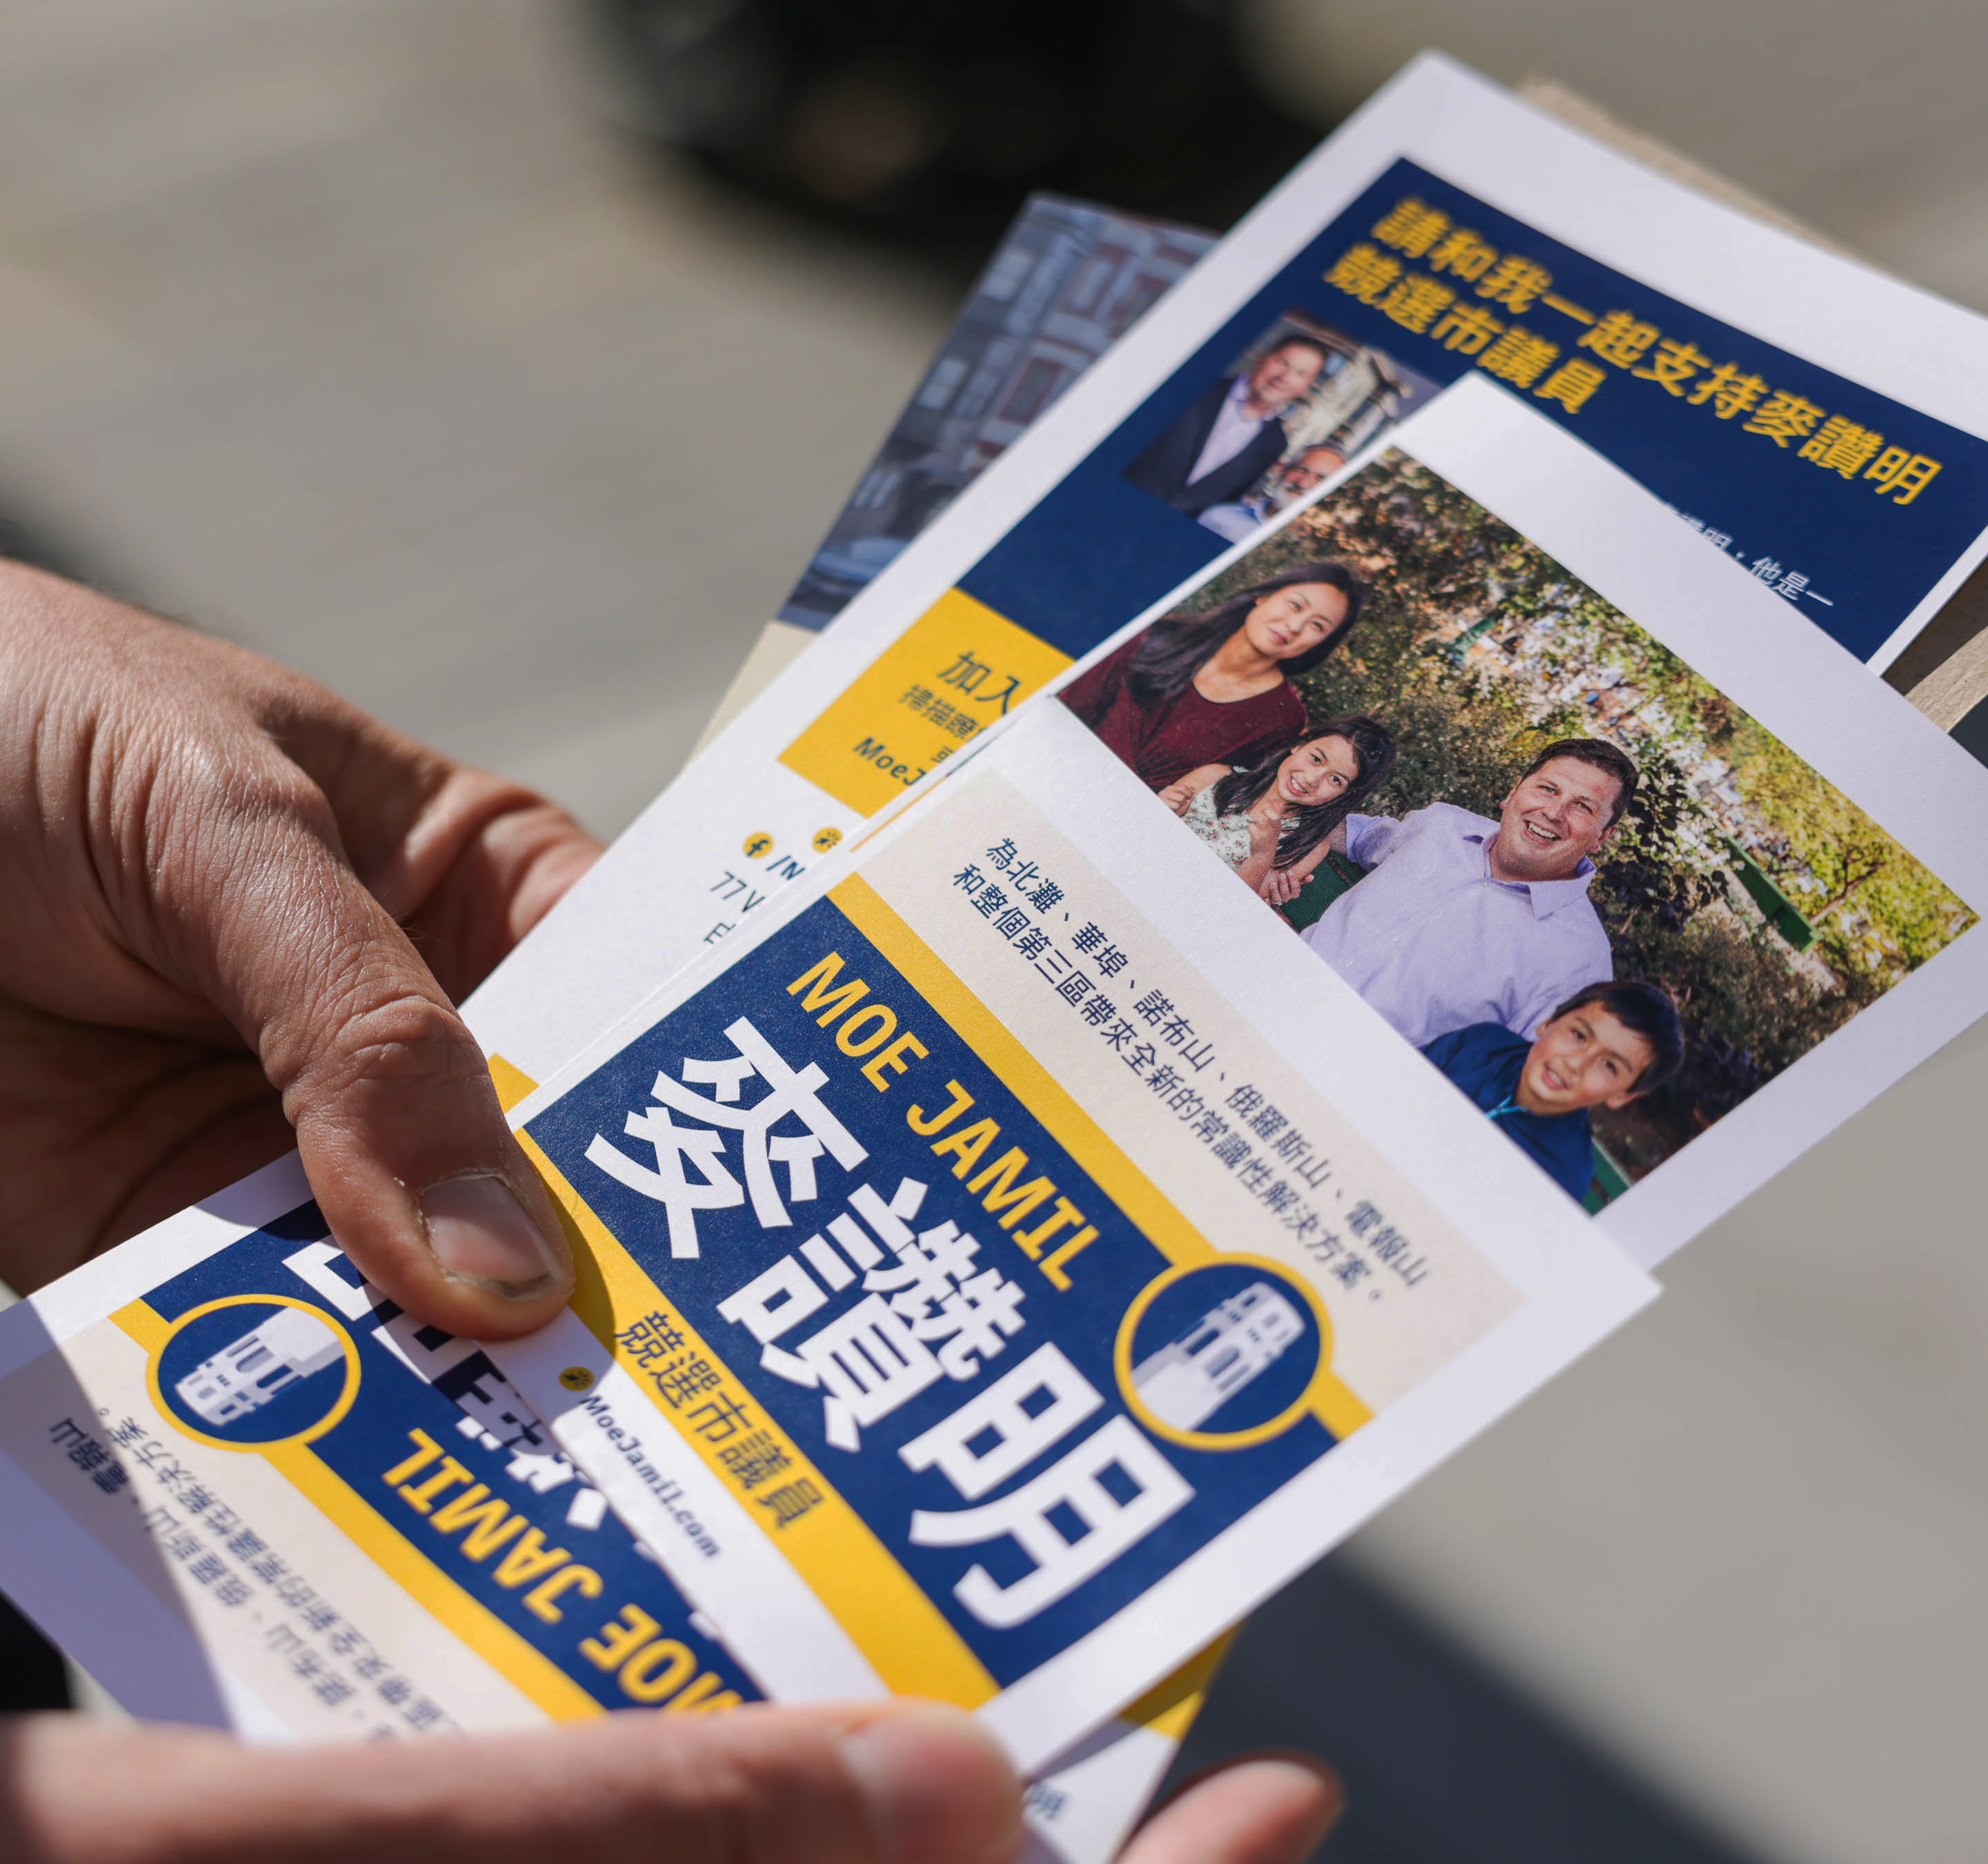 A hand holds a flyer with Chinese text, photos of smiling people, and blue-yellow design elements.